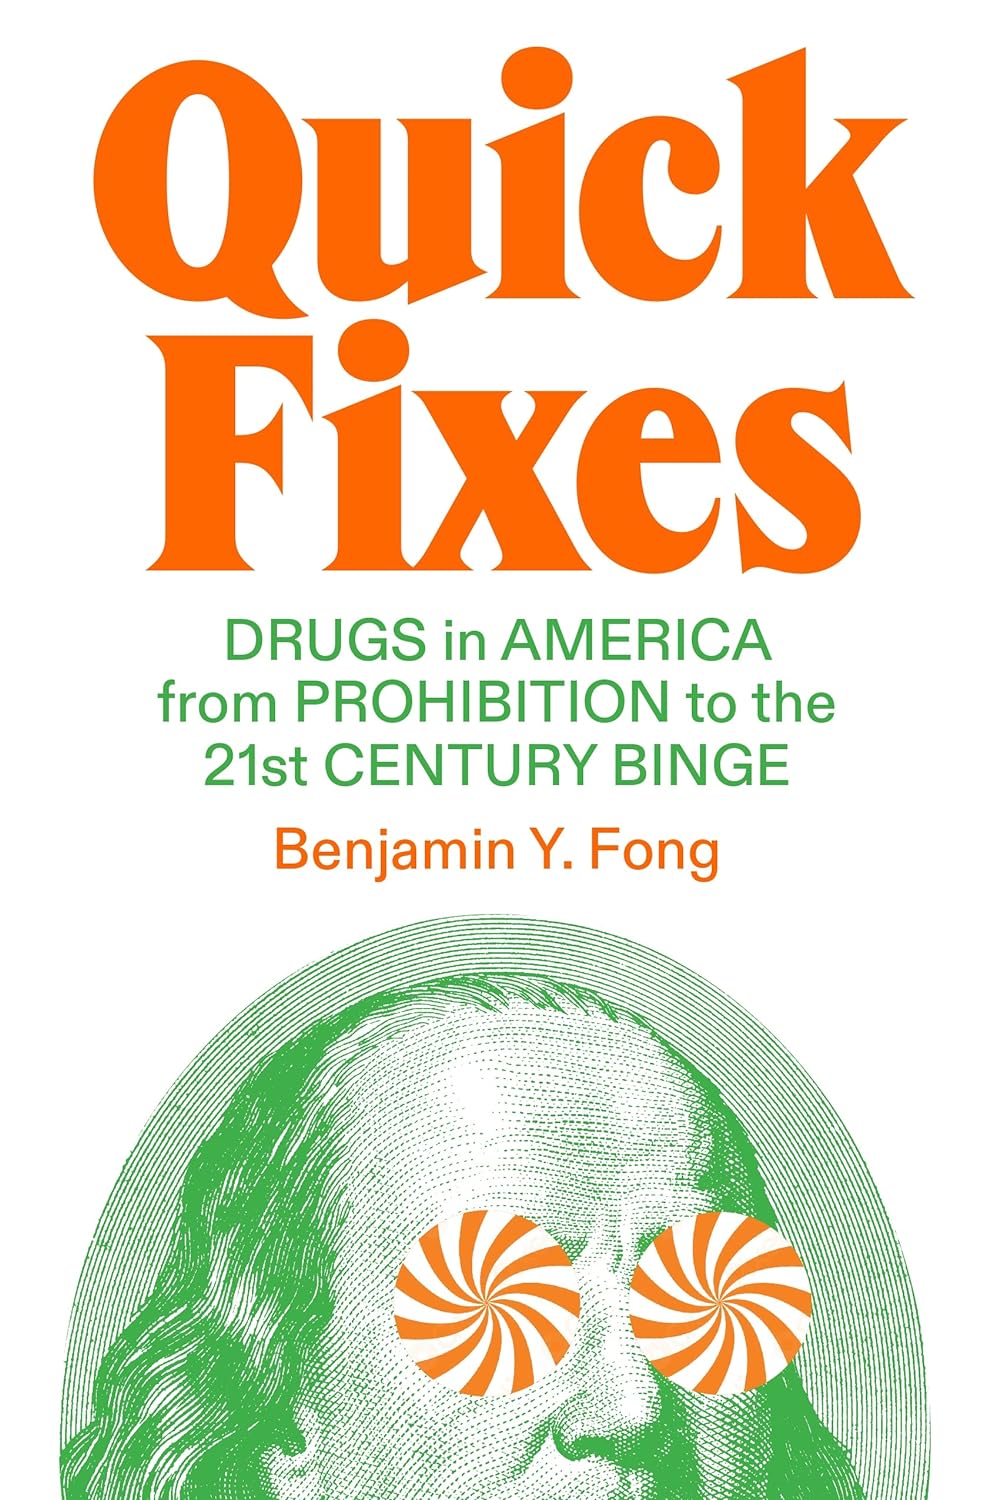 Book cover of Benjamin Y. Fong's Quick Fixes with orange and green text